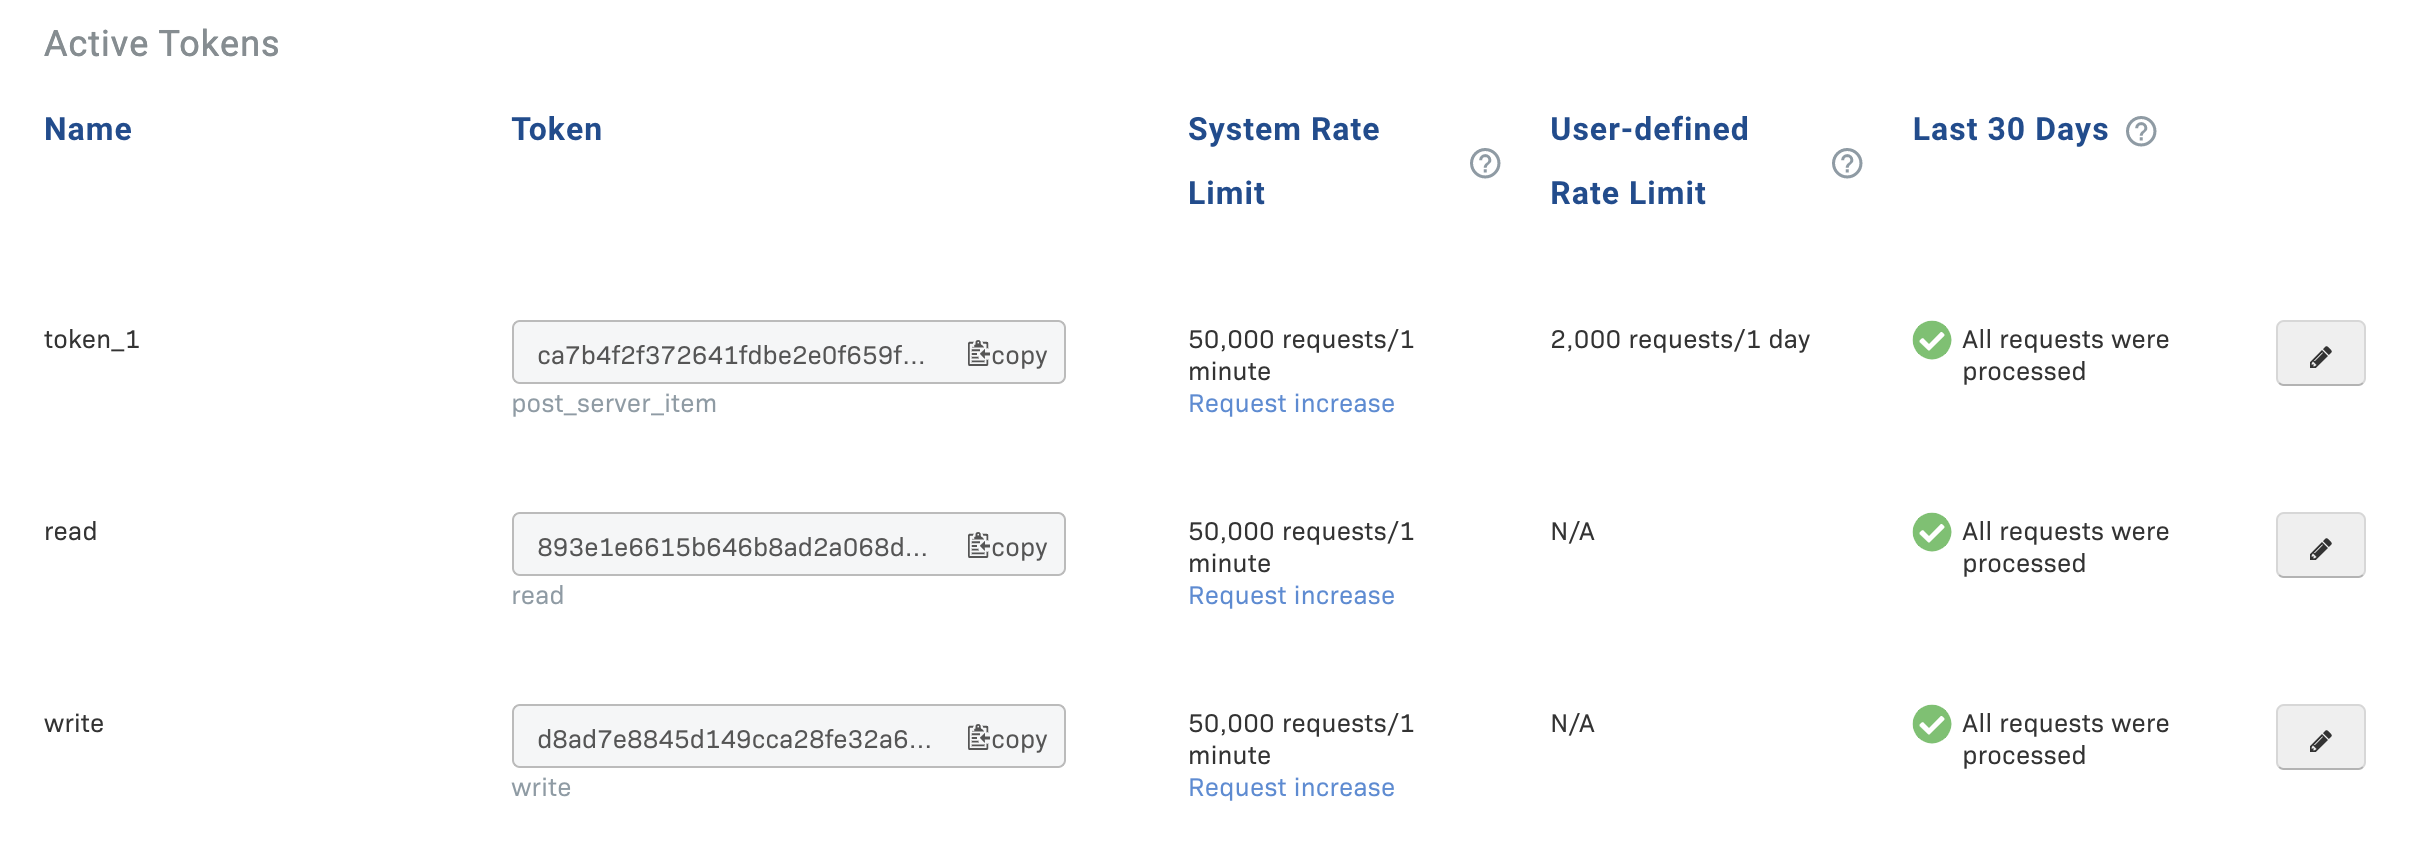 A view of some active project access tokens, with the first having a user-defined rate limit of 2000 requests/day